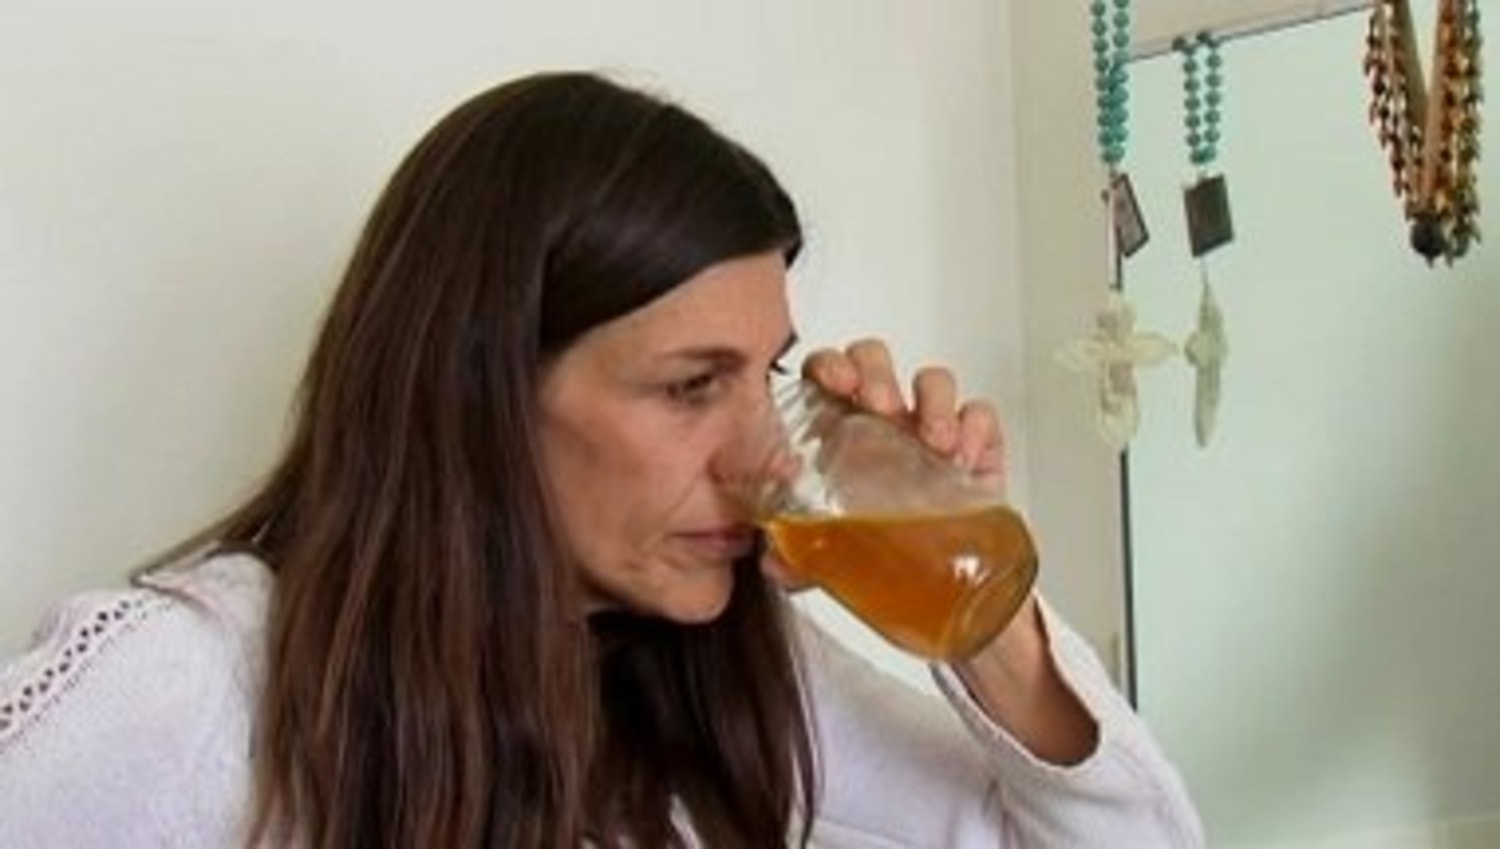 Woman drinks and bathes in her own urine on My Strange Addiction picture